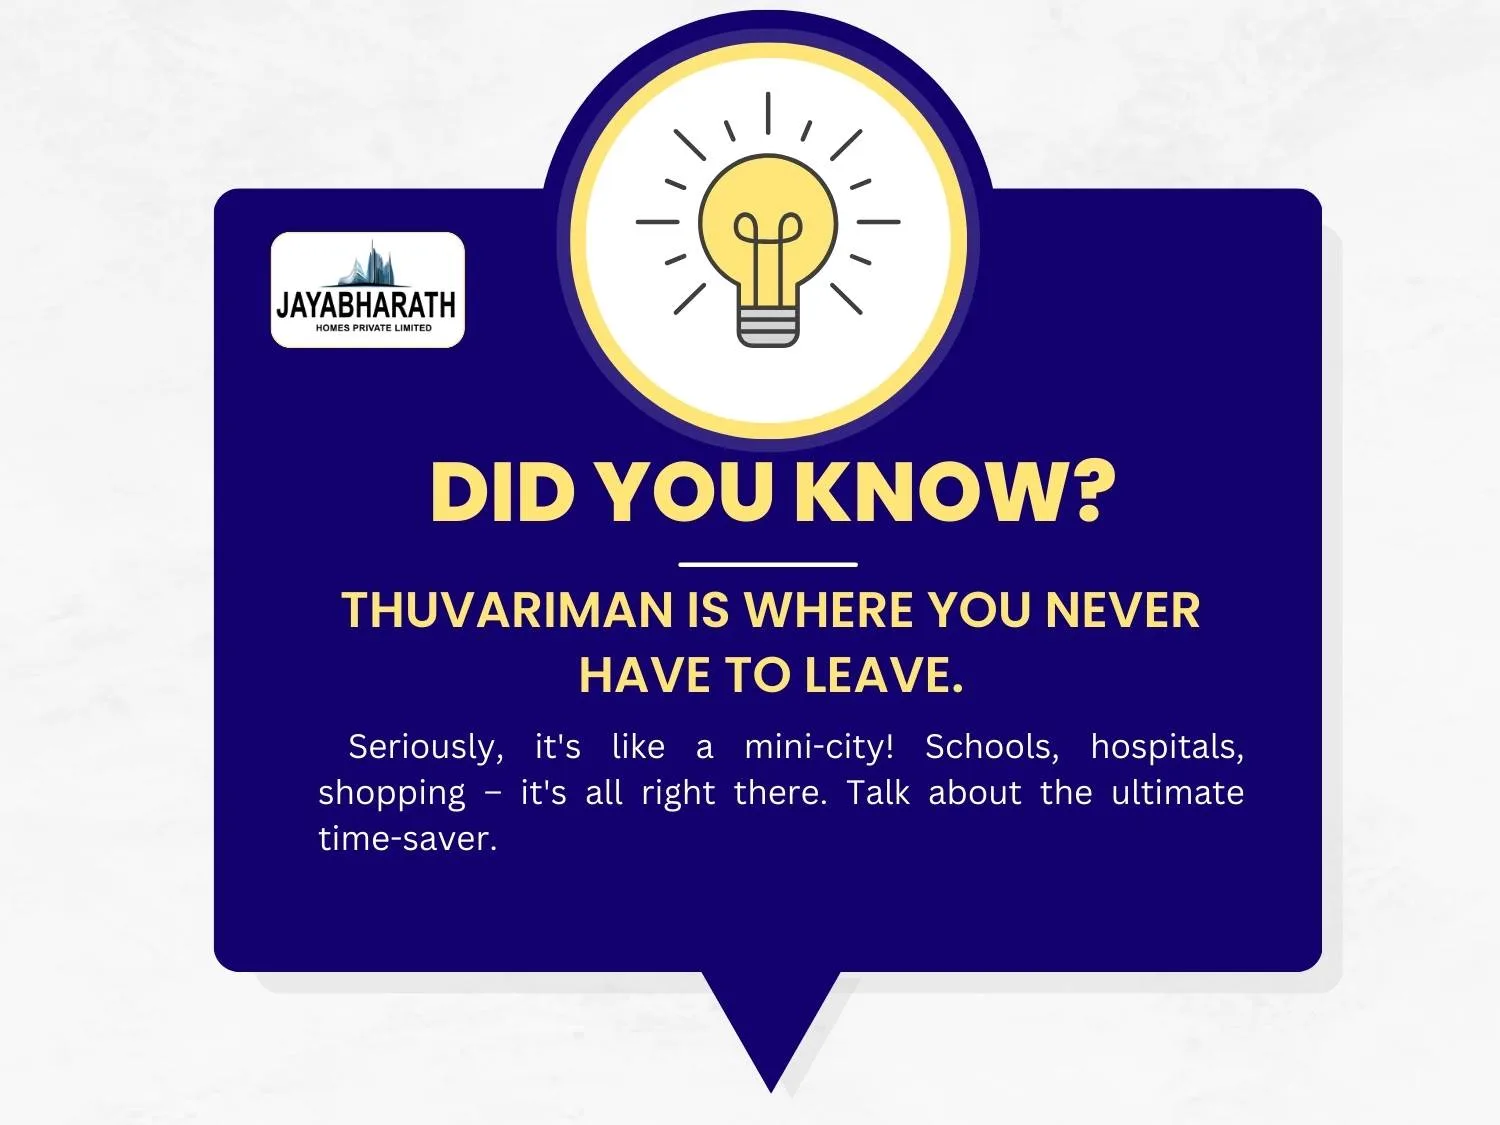 Thuvariman: The Convenience of Self-Sufficiency